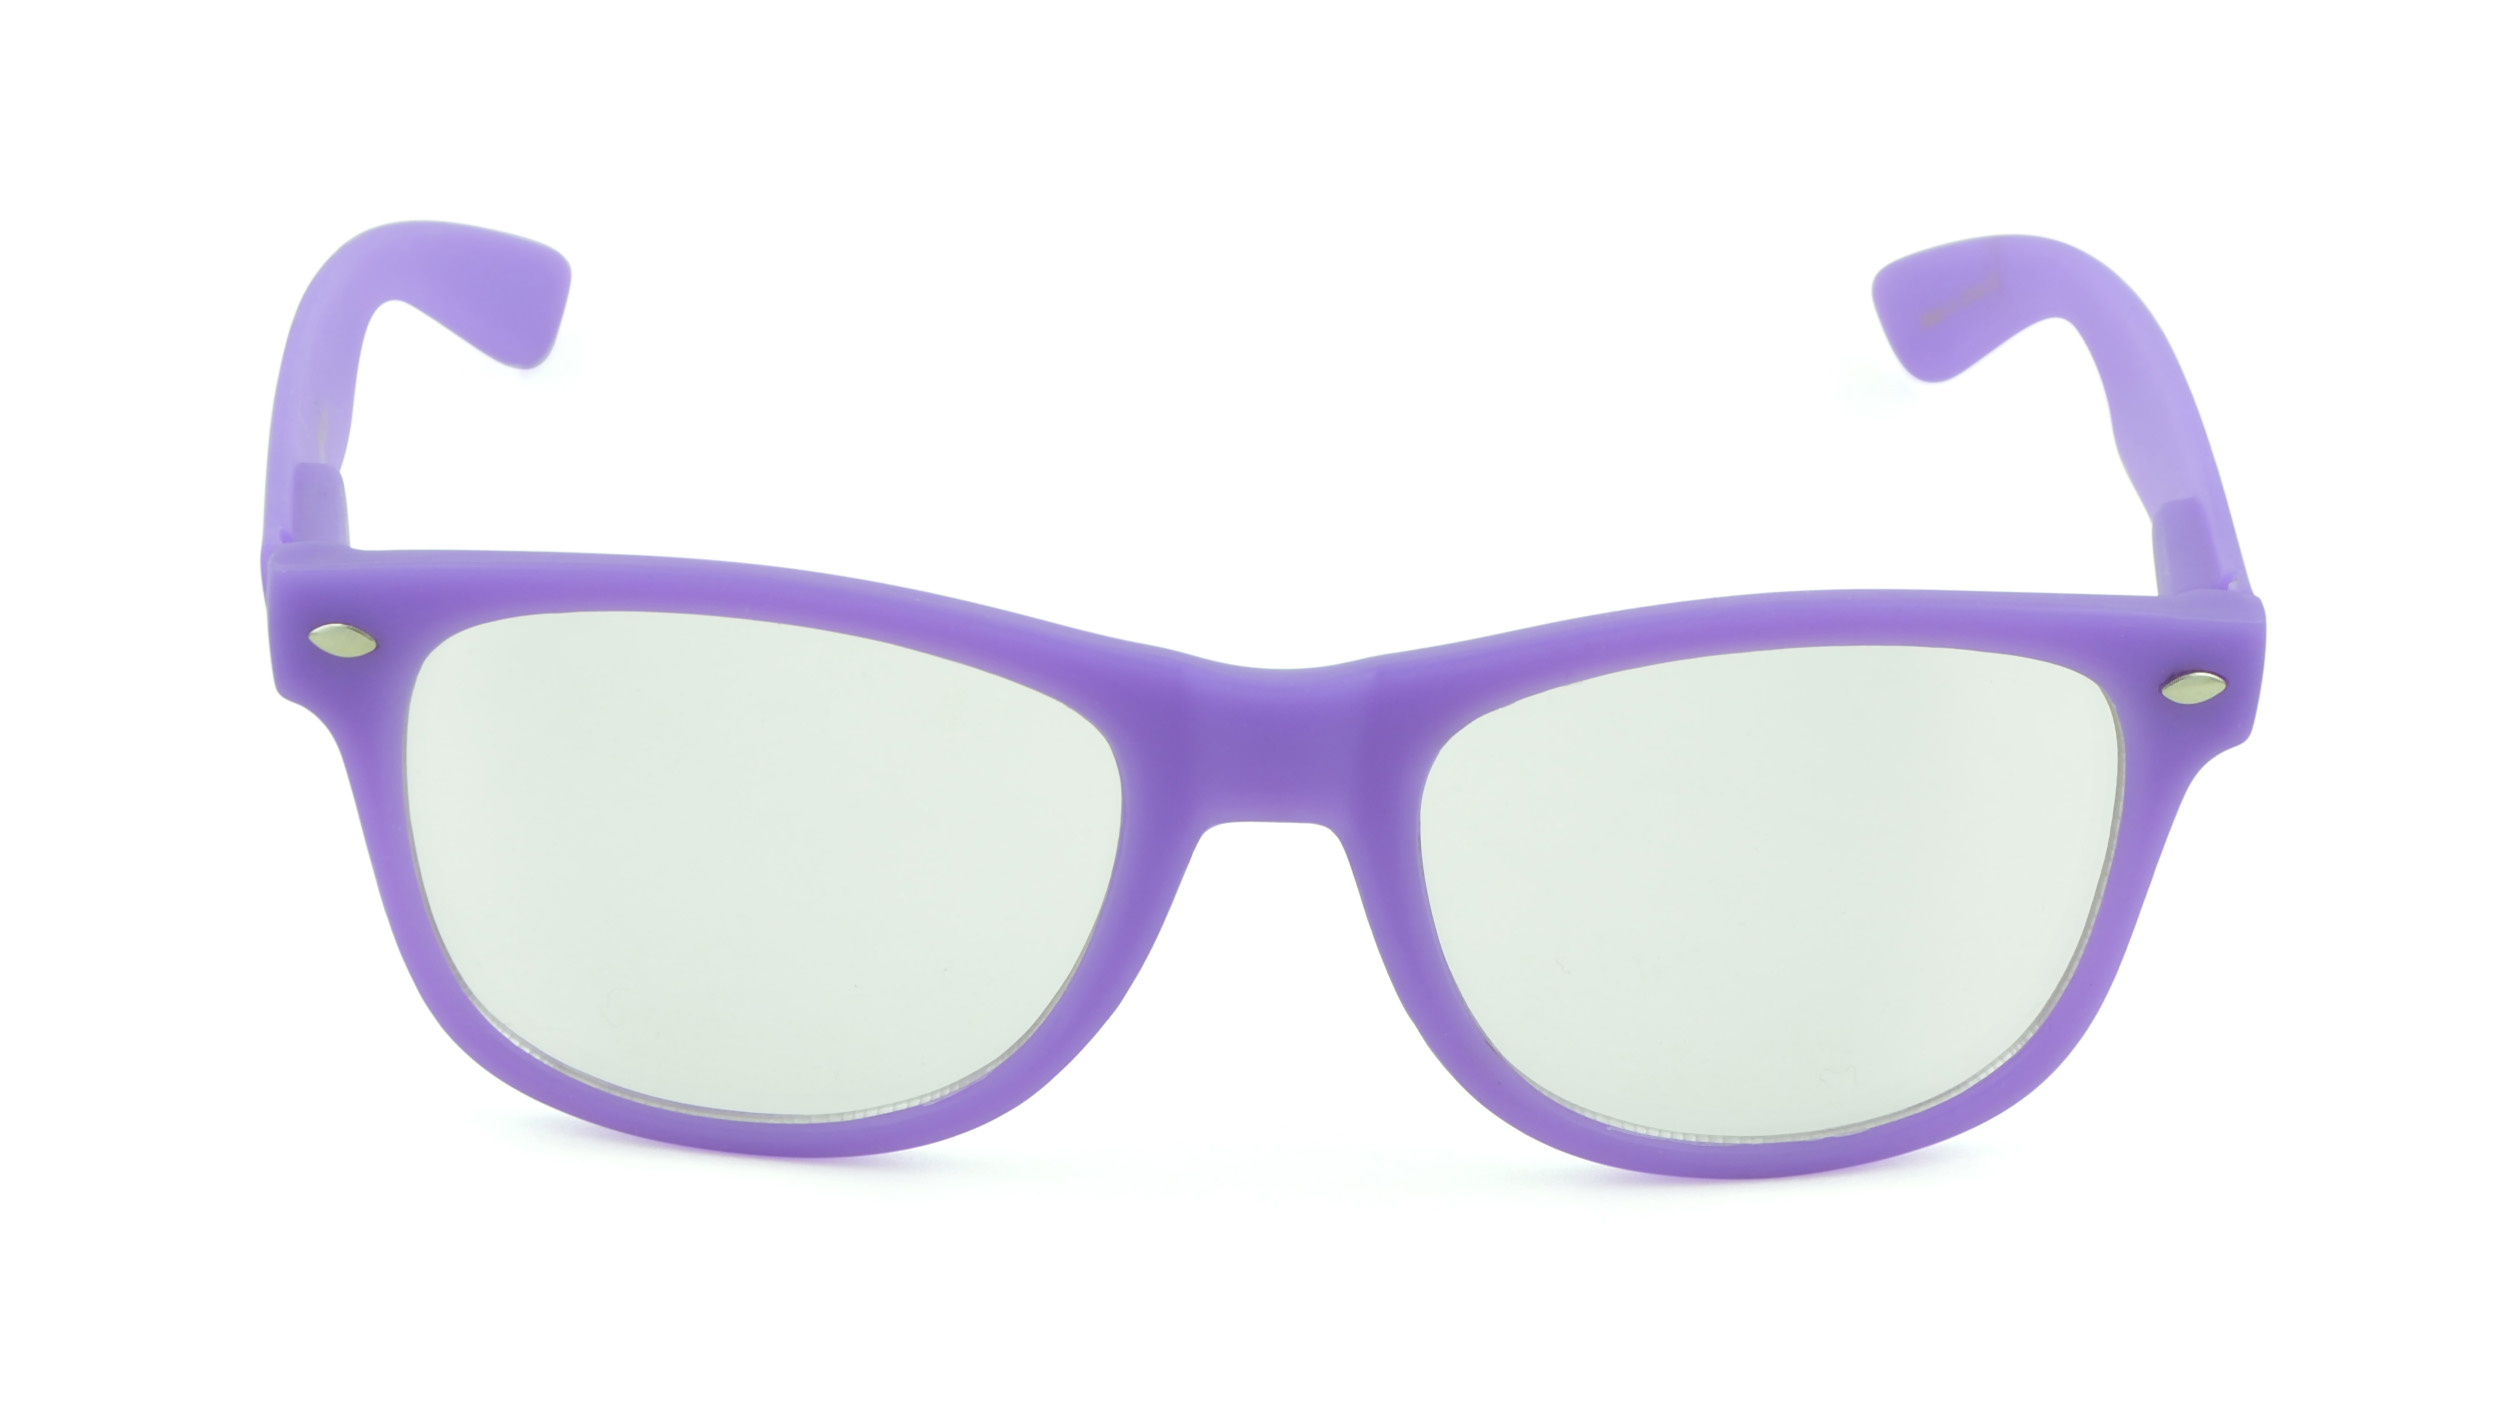 Belle Donne - Unisex Cool Rave Style Glow in the Dark Sunglasses- Purple